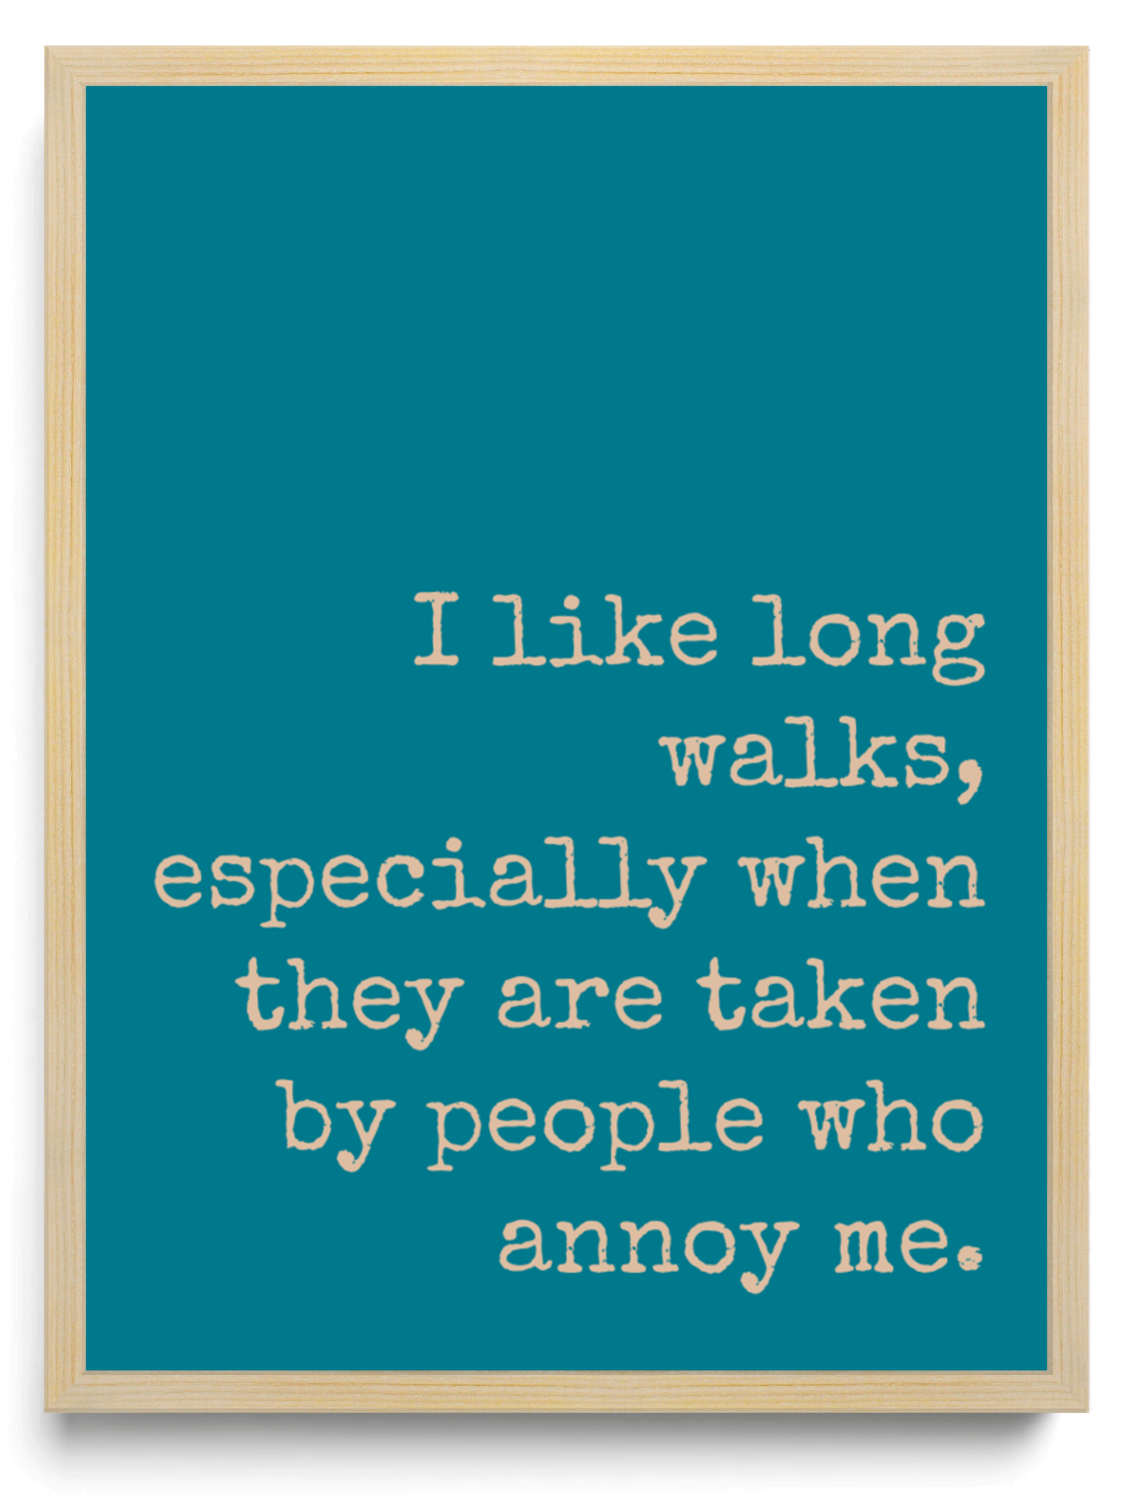 I like long walks especially when they are taken by people who annoy me framed typographic print